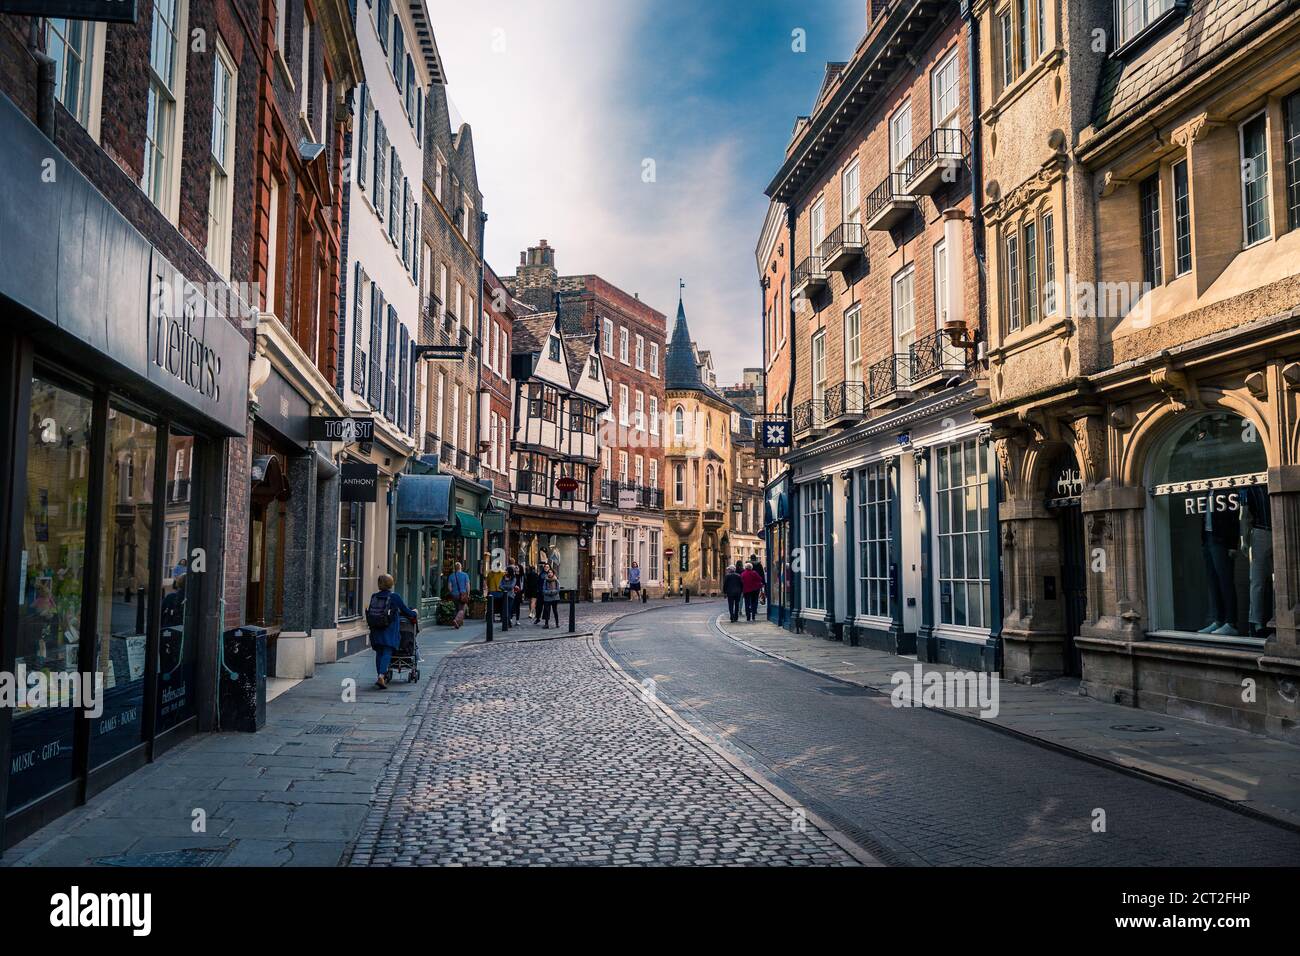 A view looking down Trinity Street in Cambridge, uk Stock Photo